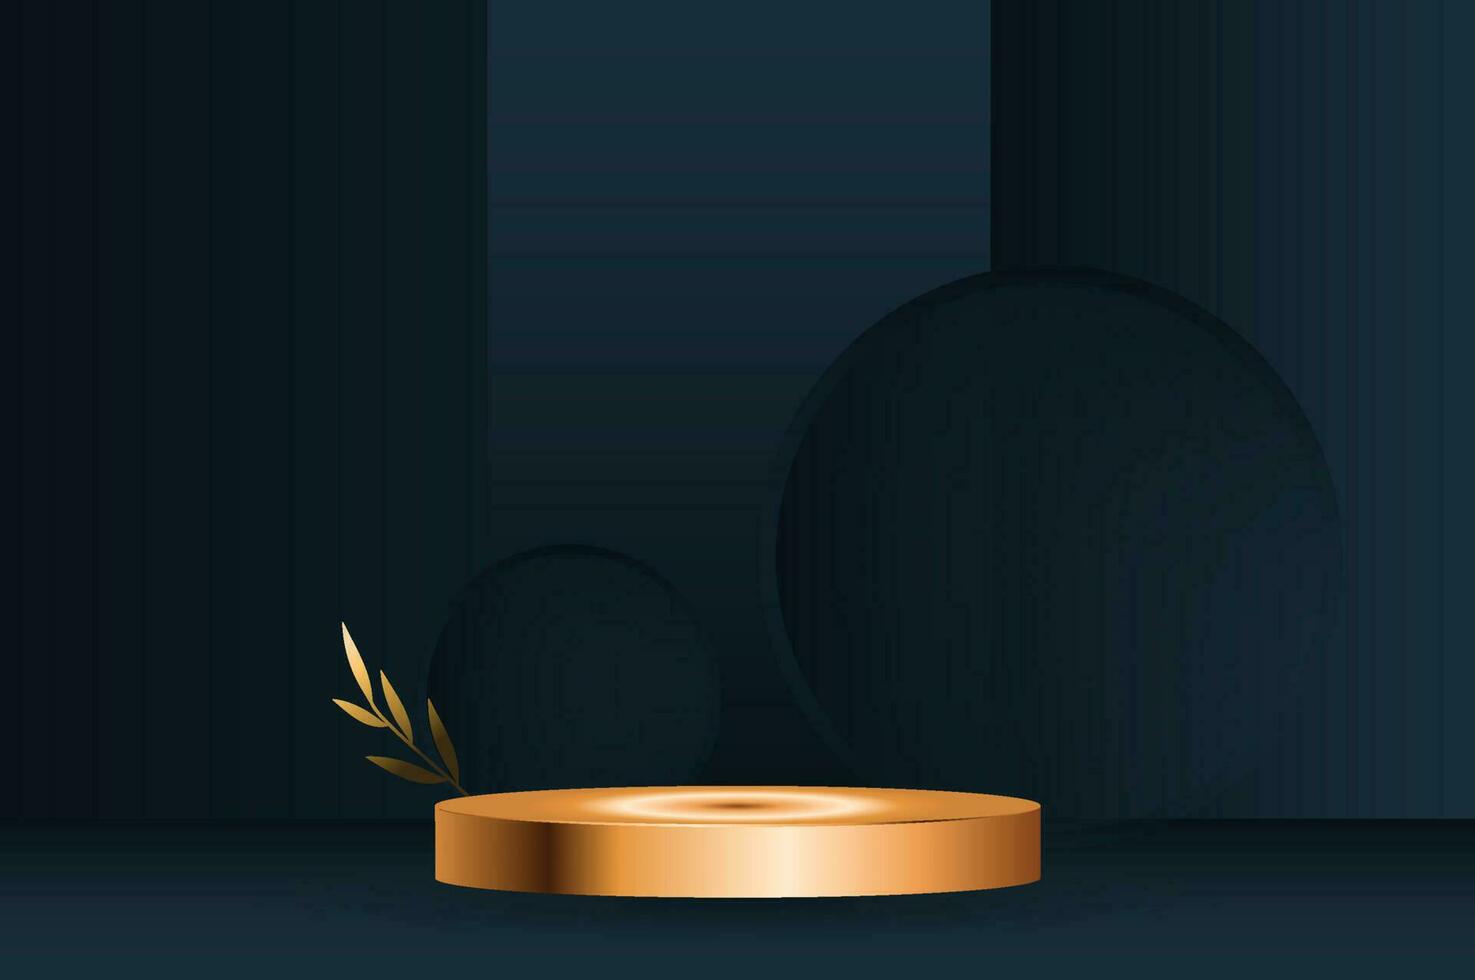 Golden and Blue Cylinder Podium - Luxury Blank Stage for Product Display vector